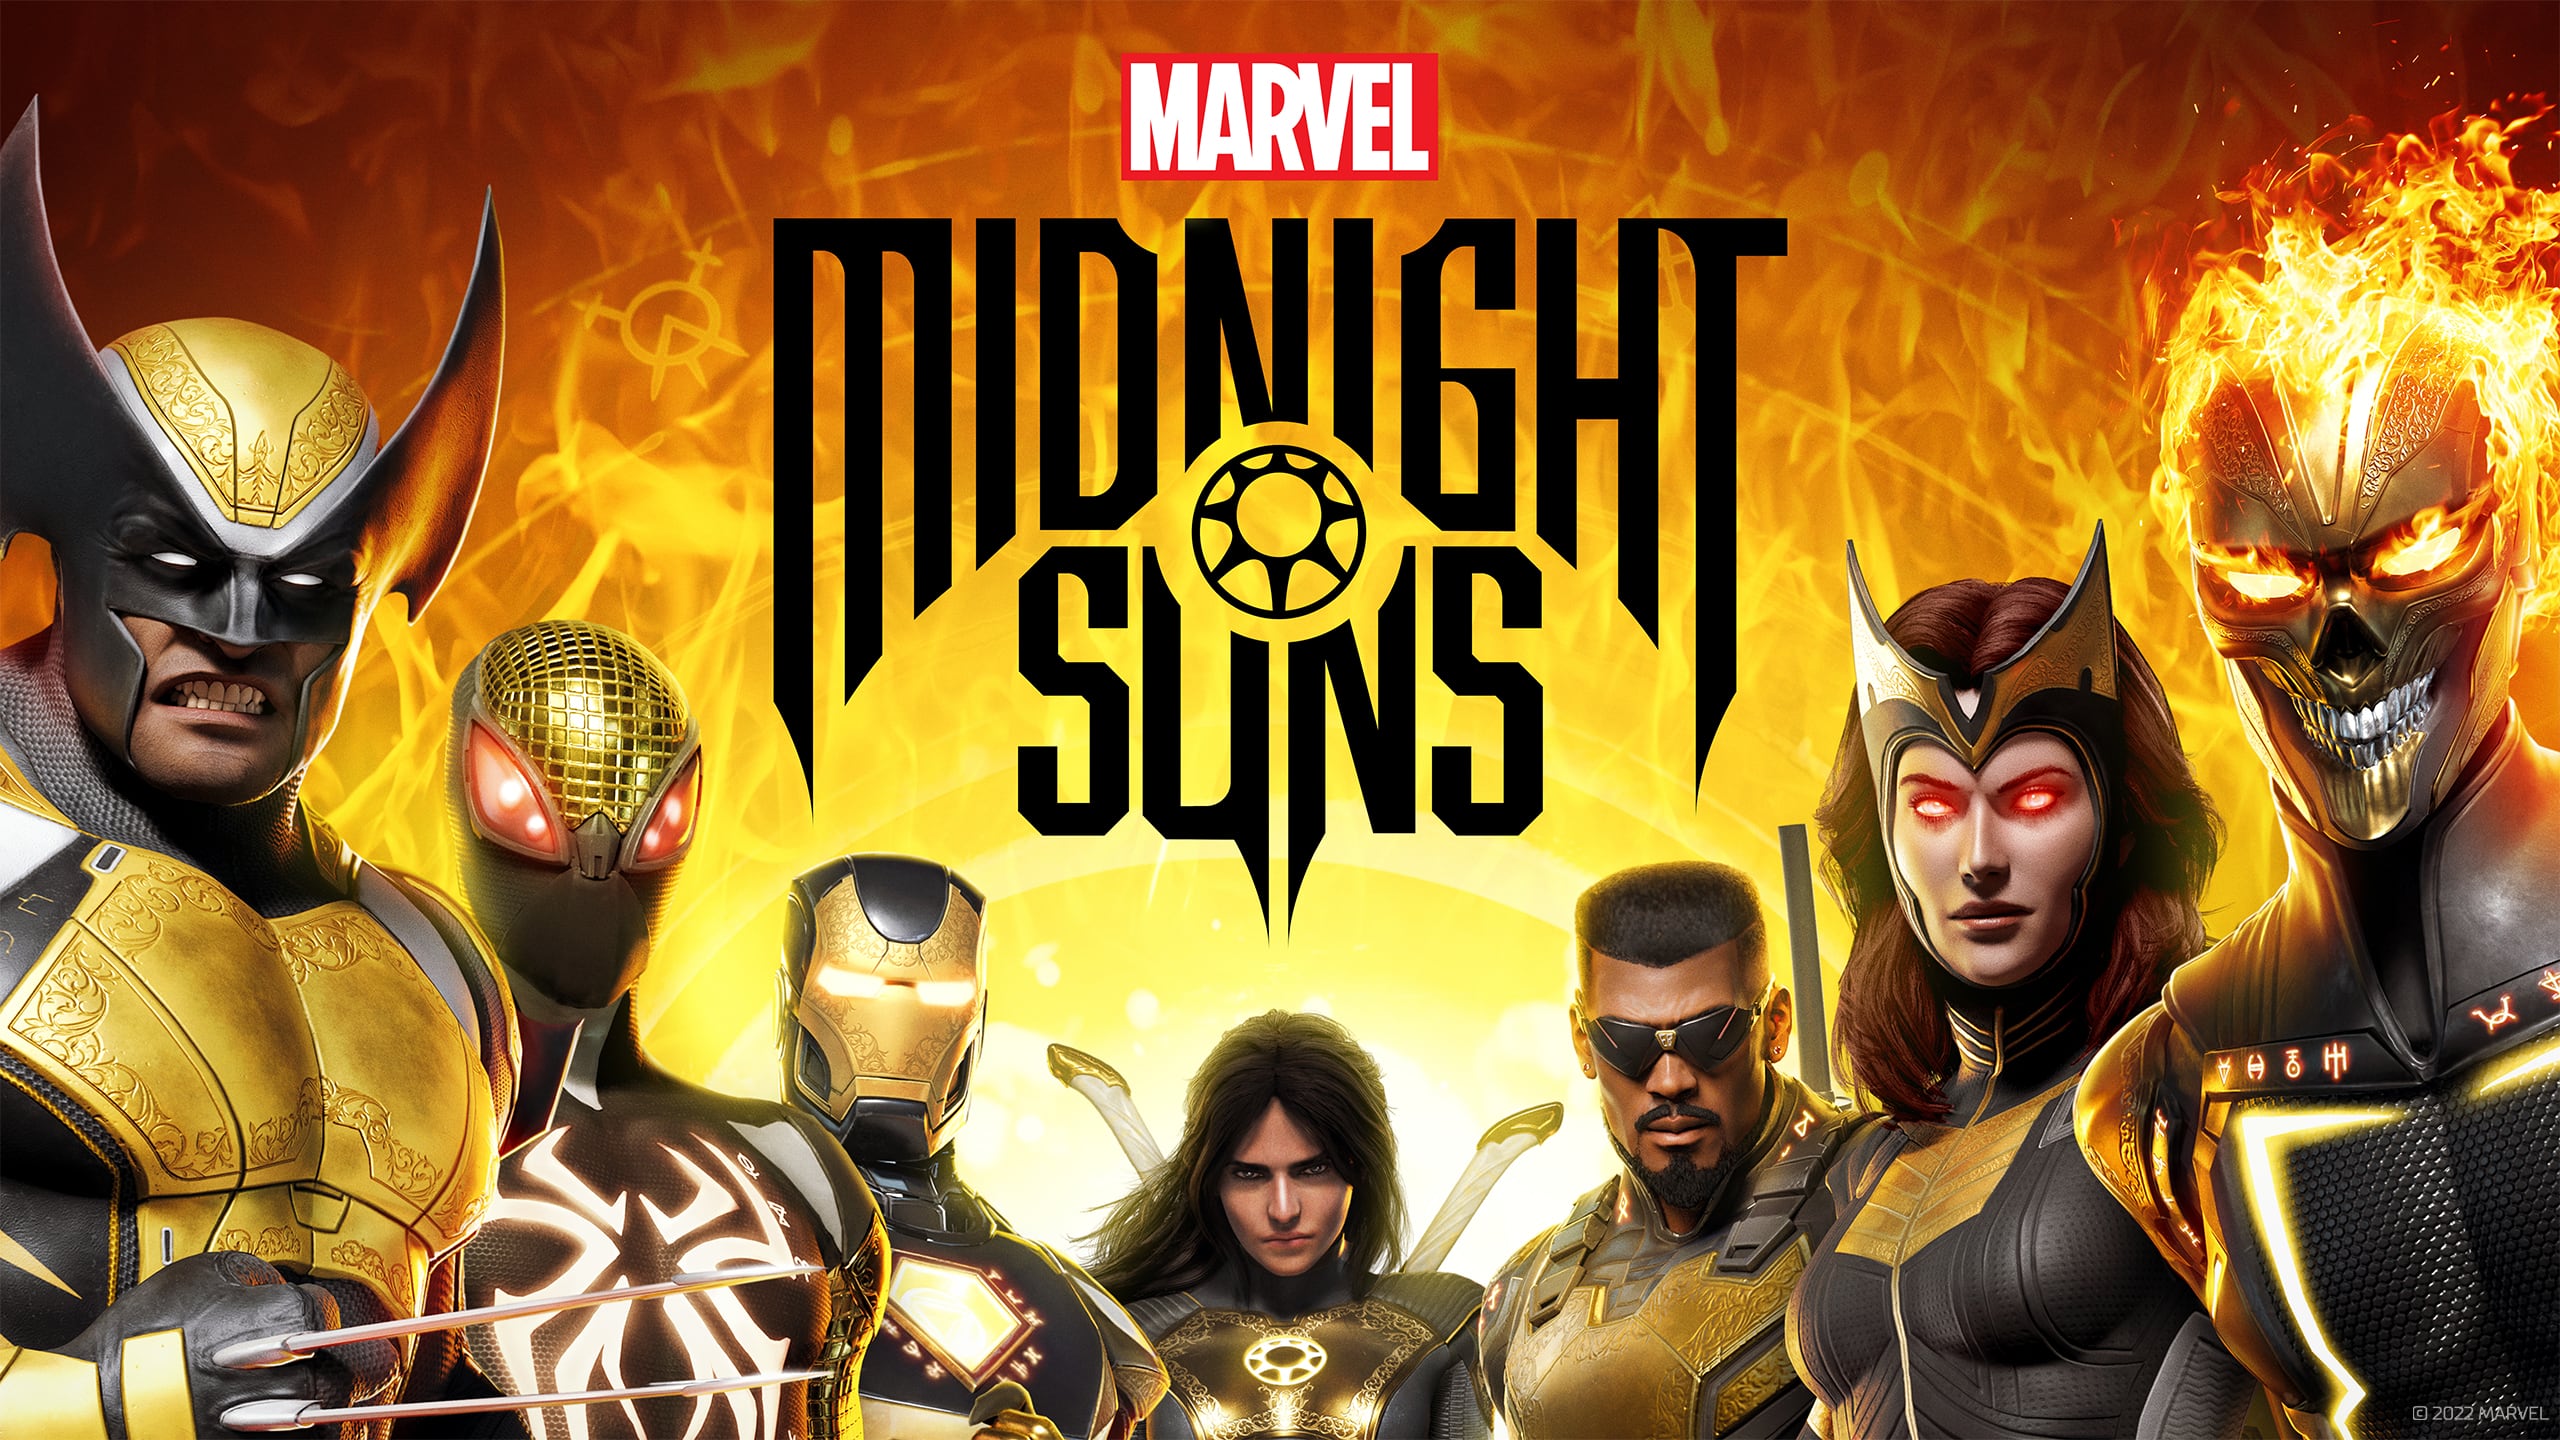 Marvel's Midnight Suns Delayed Indefinitely; There is No New Date